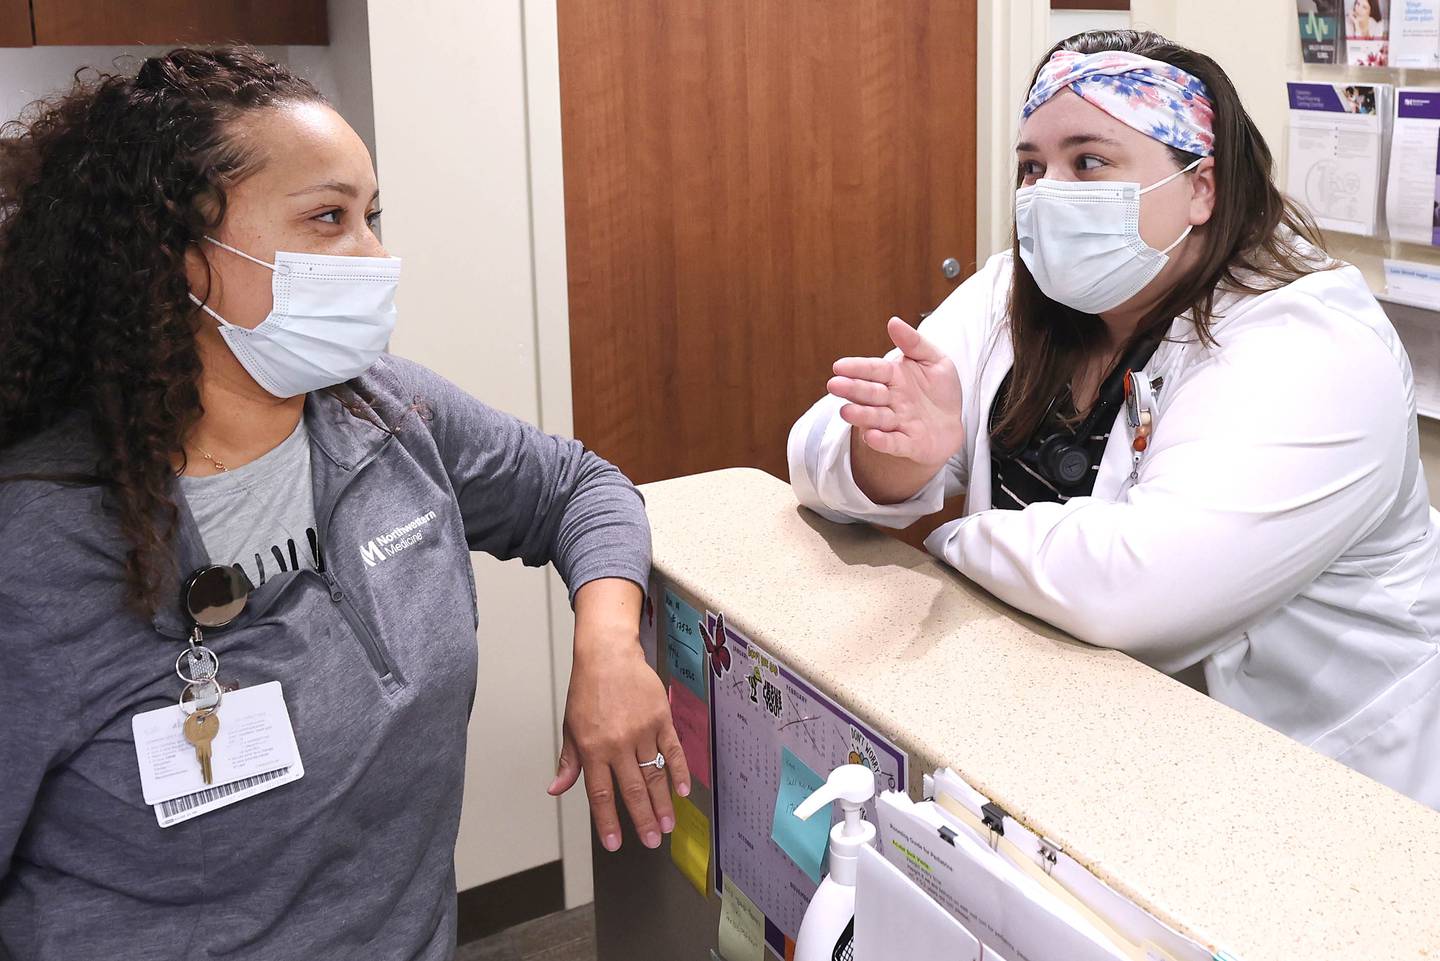 Pediatrician Dr. Blair Wright (right) talks to Alexis Wooden, a medical assistant, Friday, Nov. 4, 2022, at Northwestern Medicine Valley West Hospital in Sandwich.